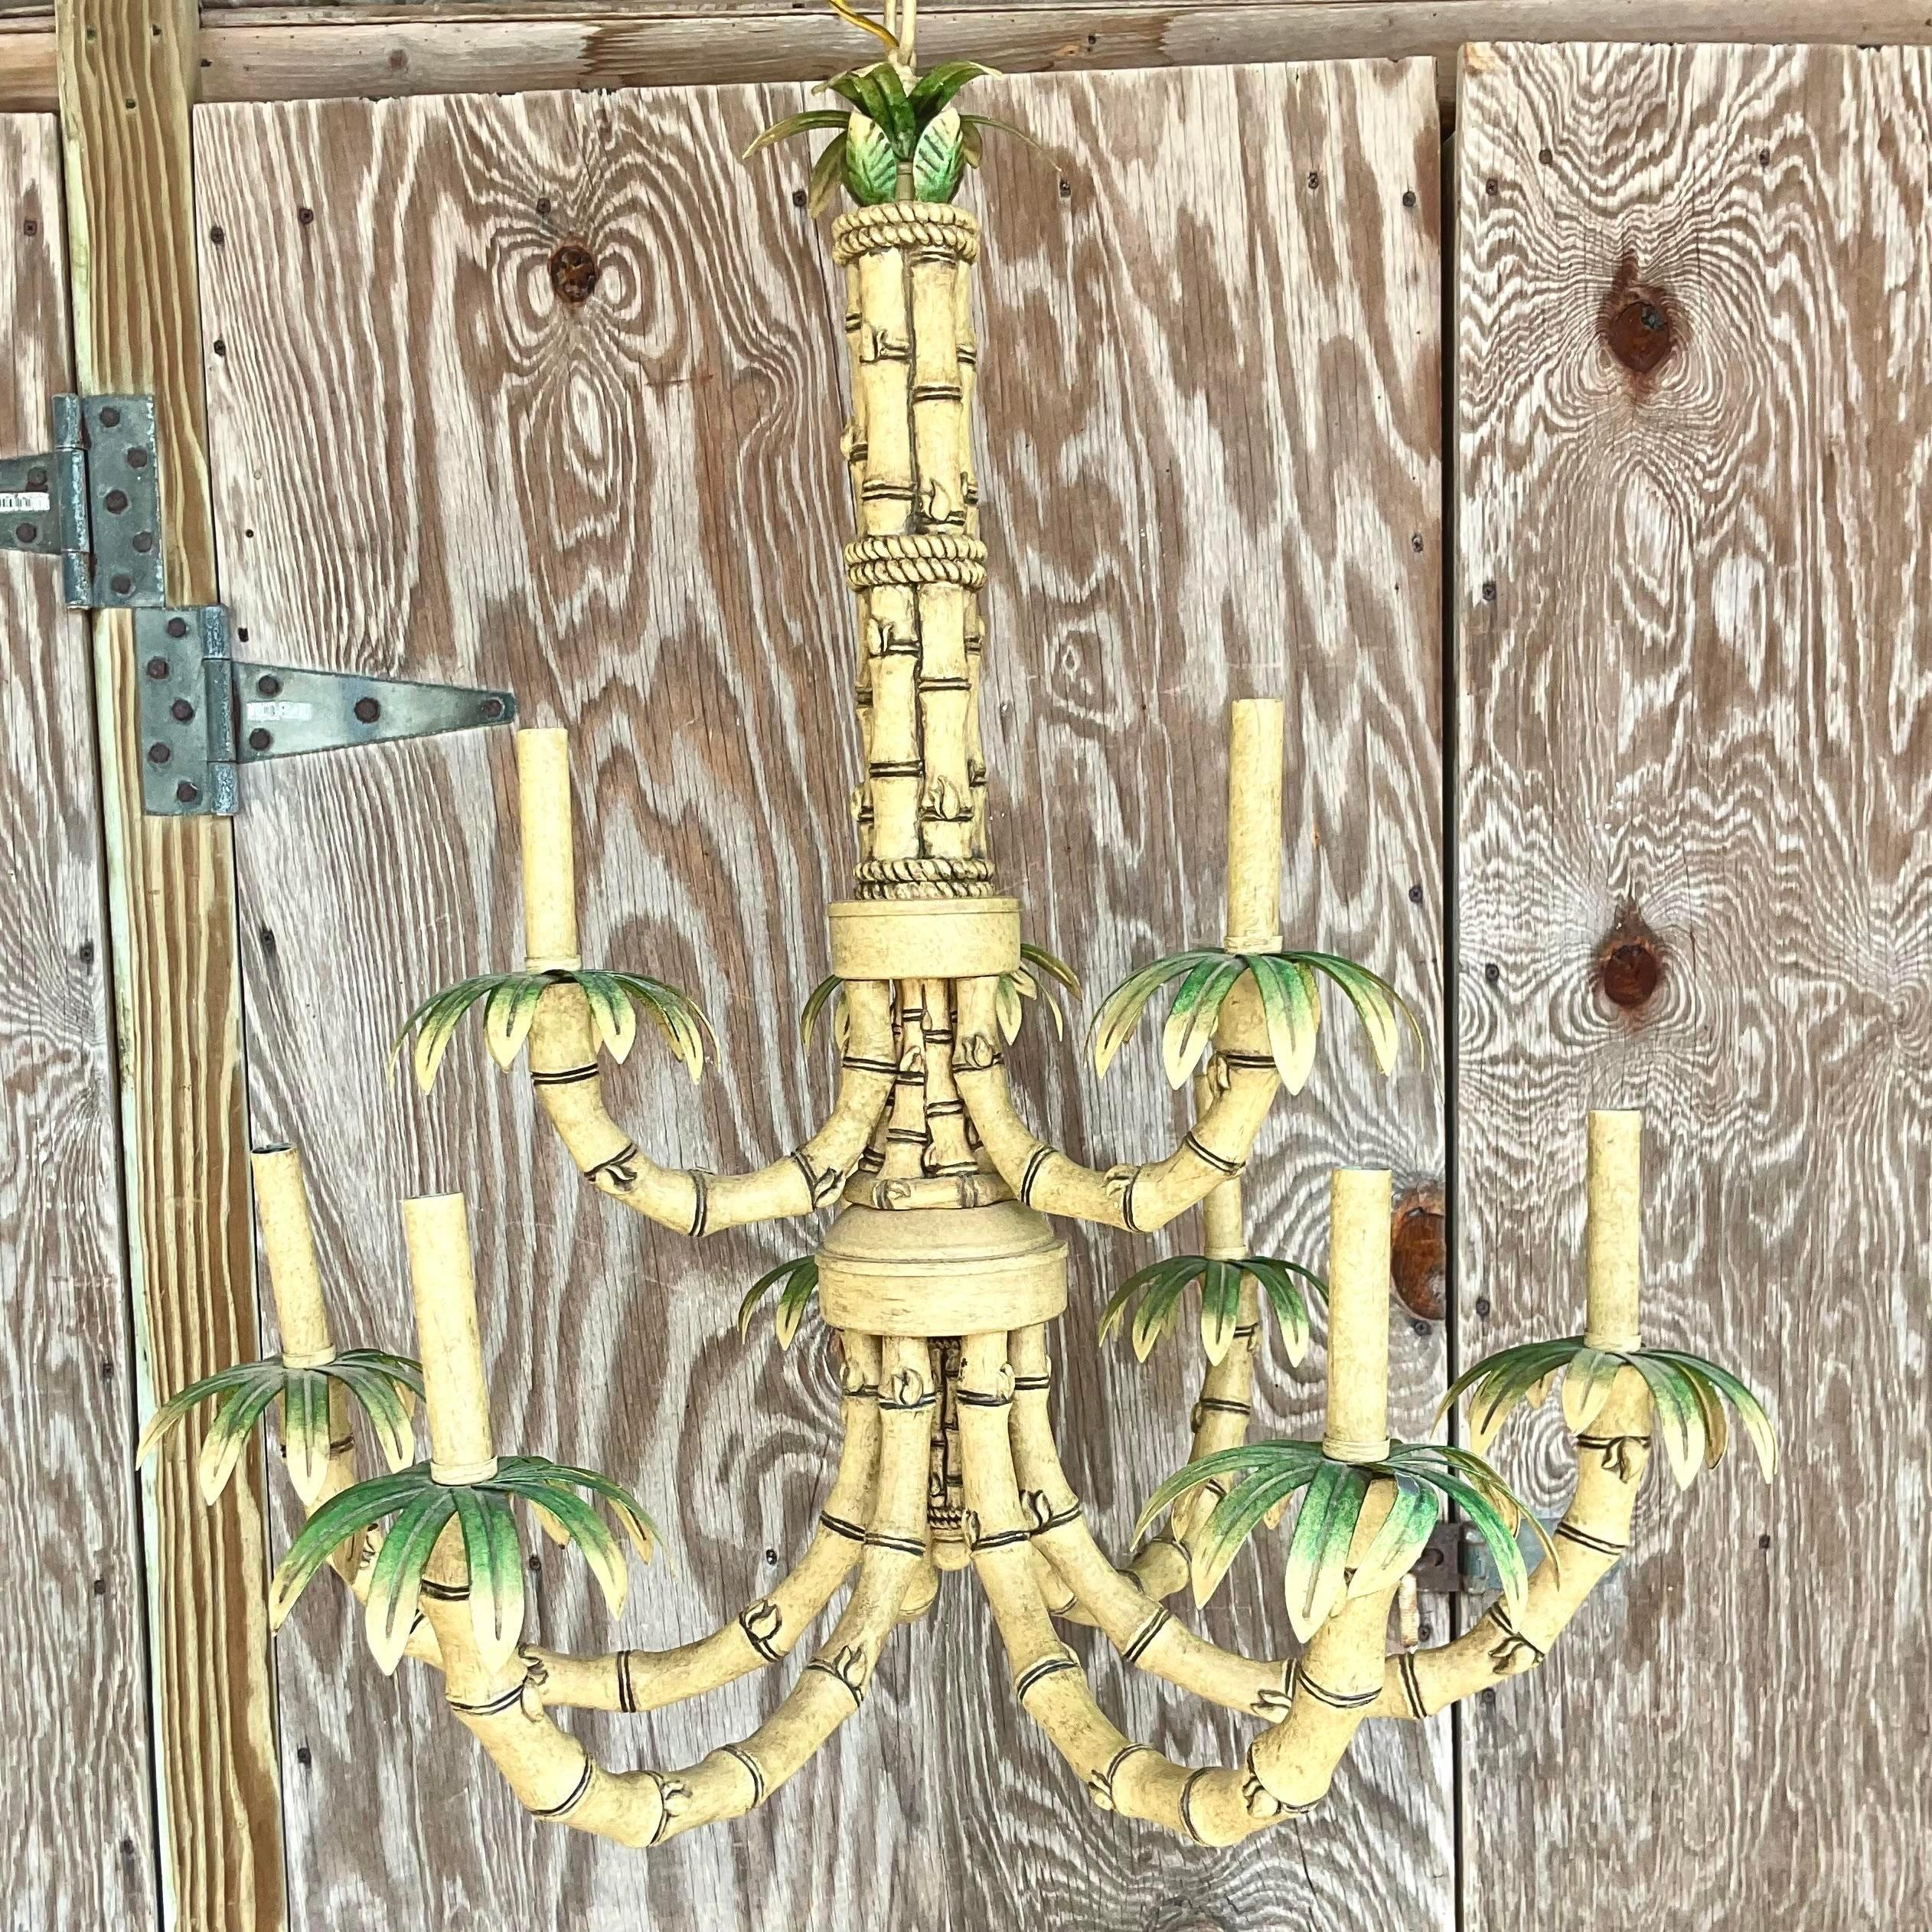 A fantastic vintage coastal chandelier. A chic bamboo design in a painted metal construction. Acquired from a Palm Beach estate.